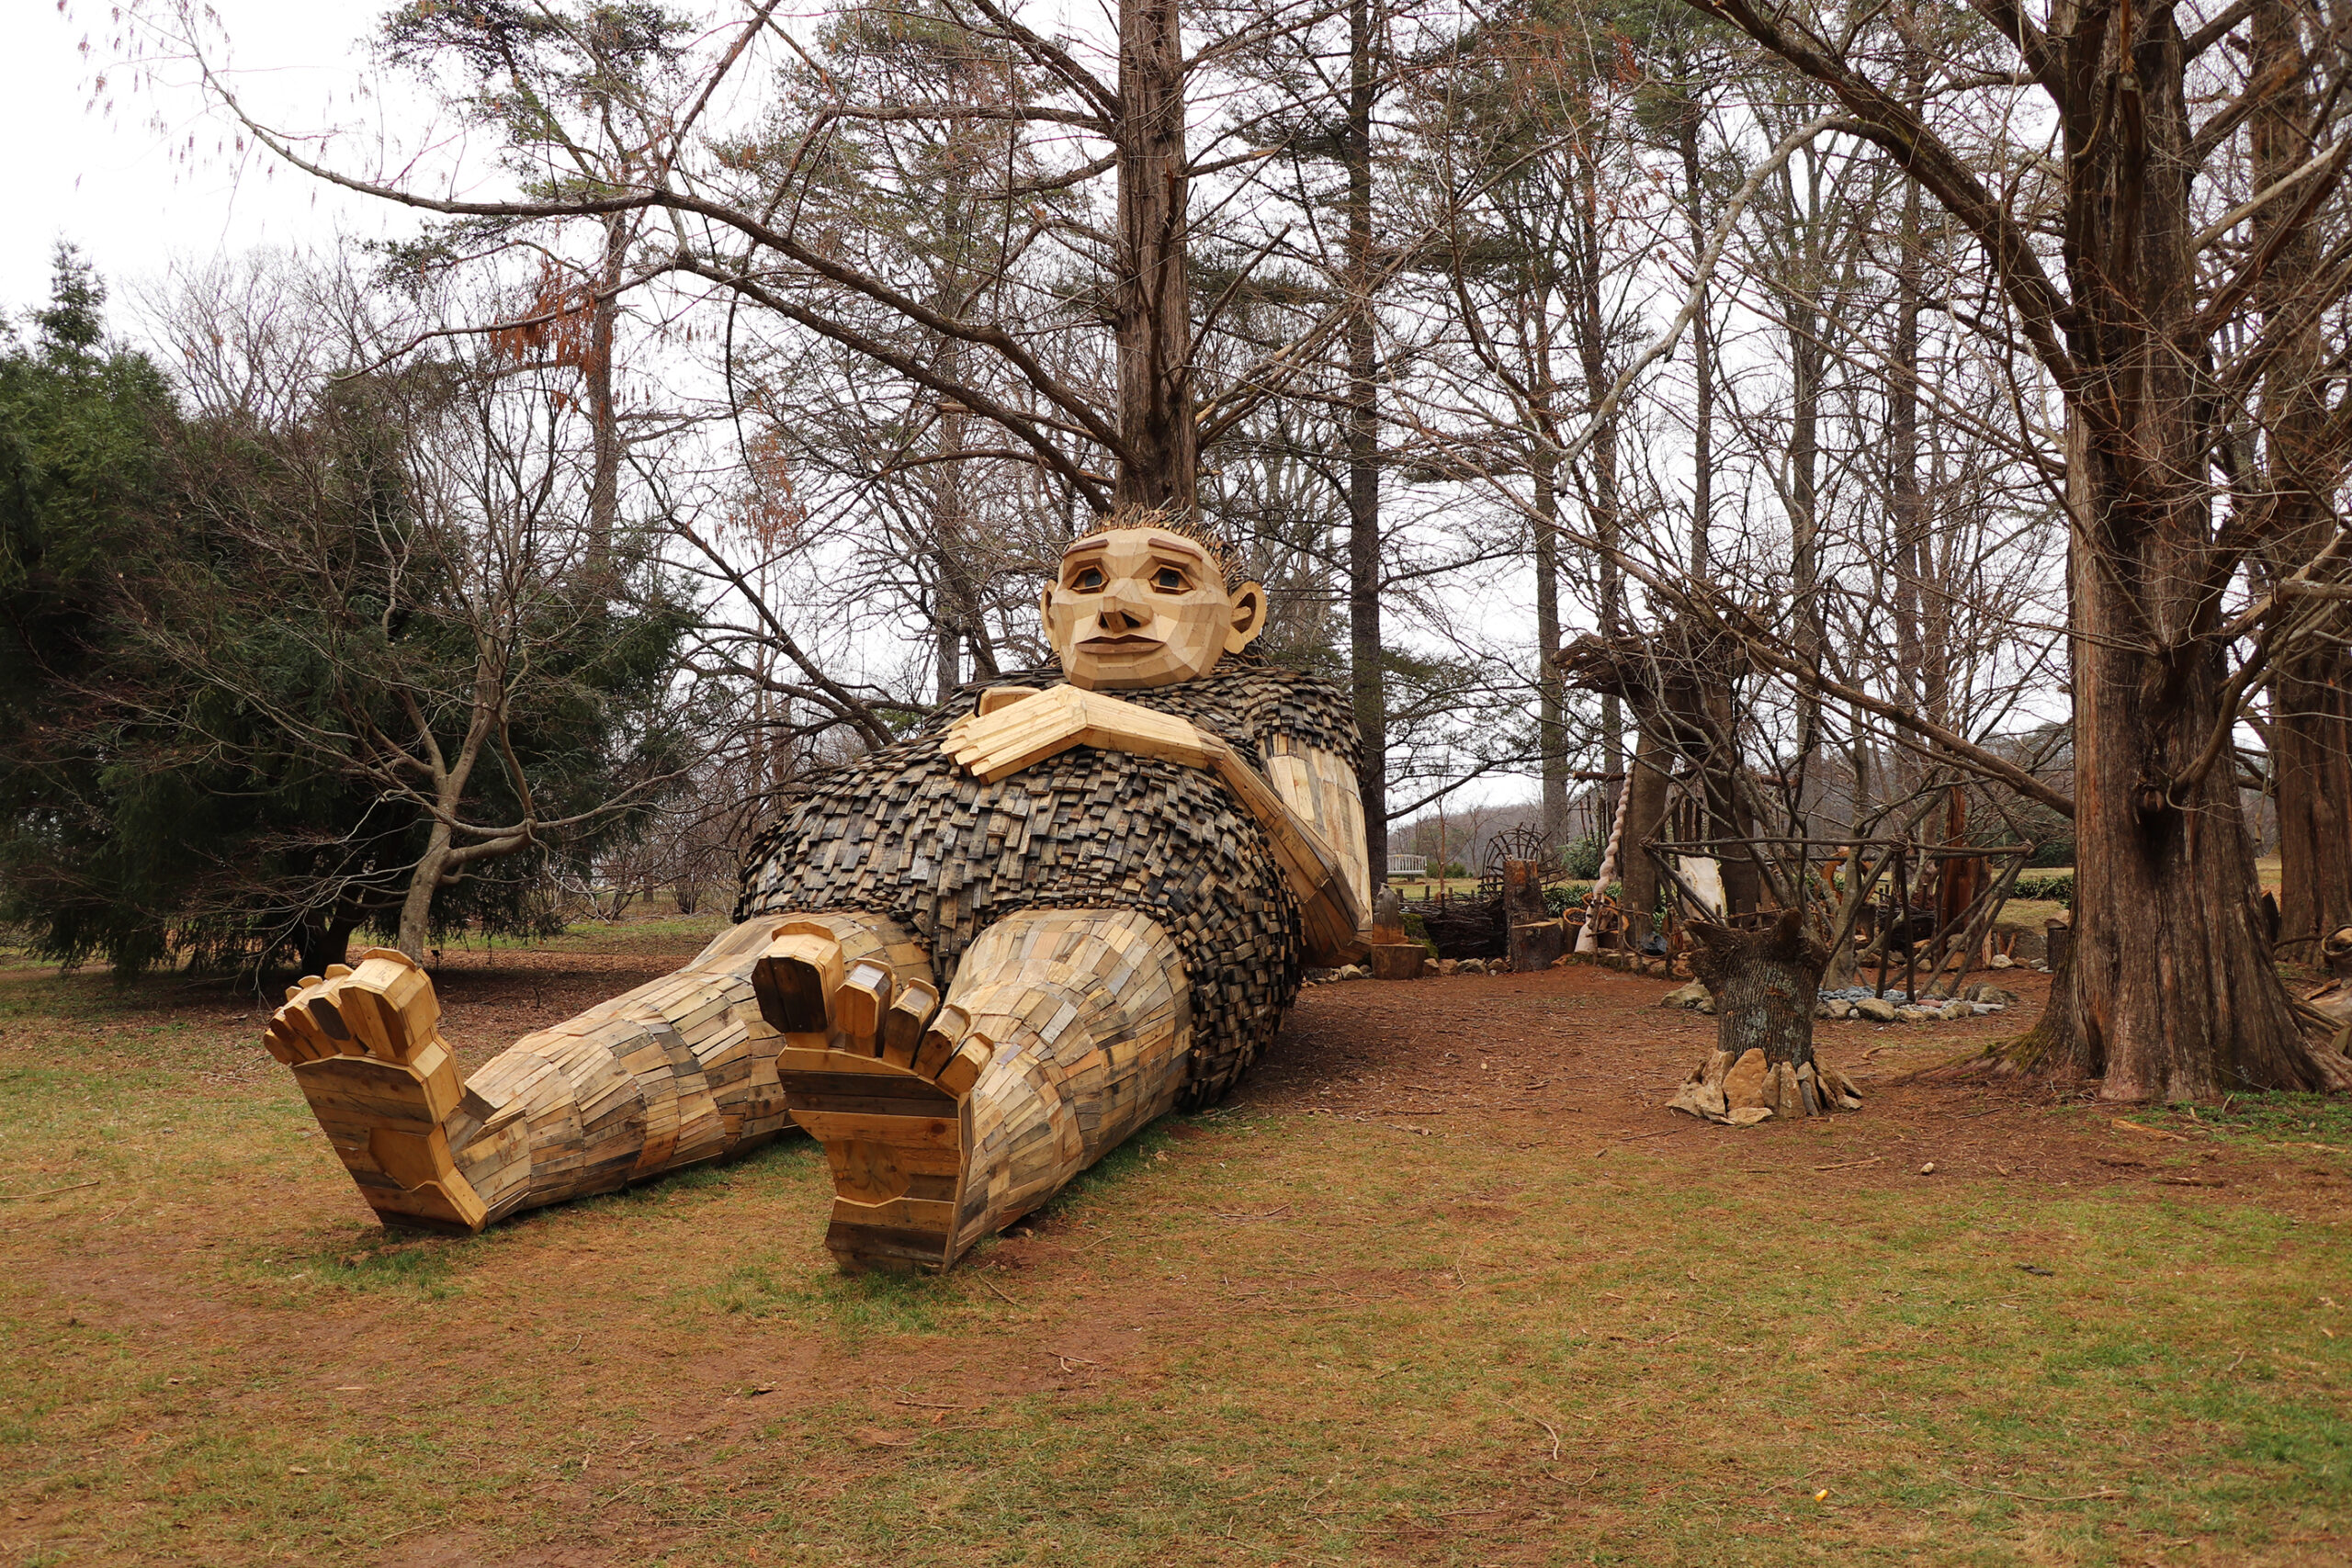 Feast at the Feet of Giants - Bernheim Arboretum and Research Forest